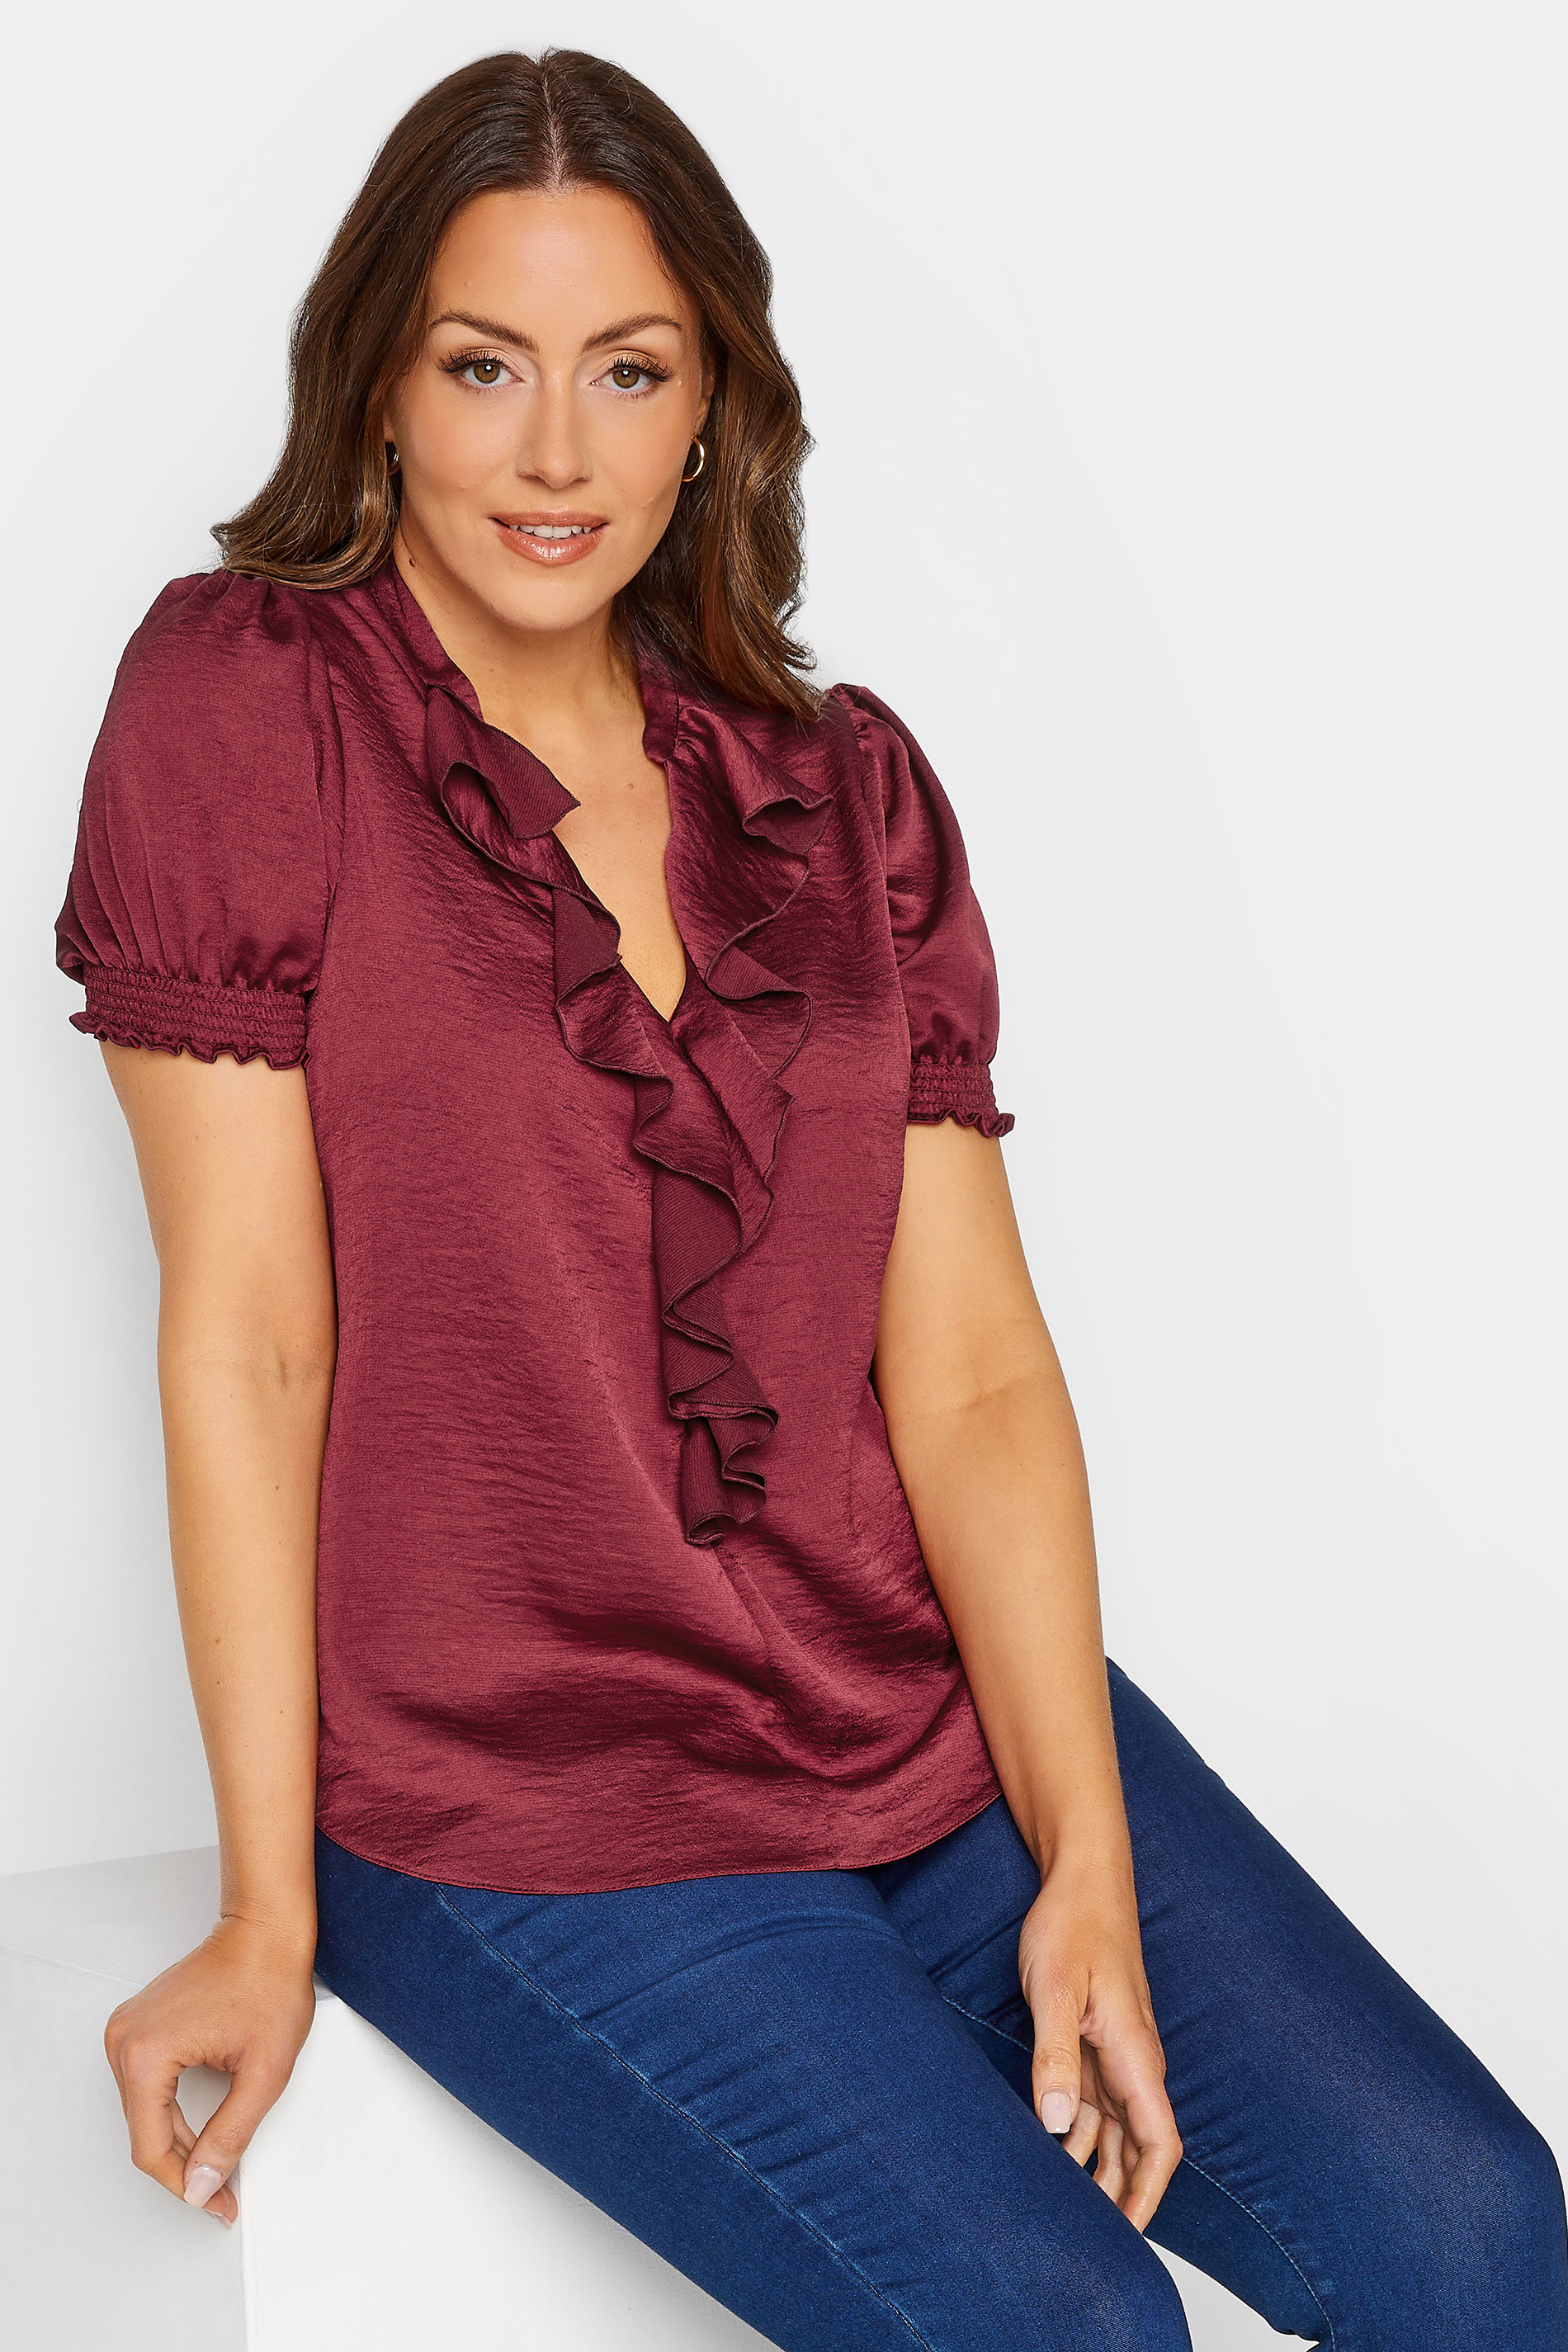 M&Co Burgundy Red Frill Satin Blouse | M&Co 1